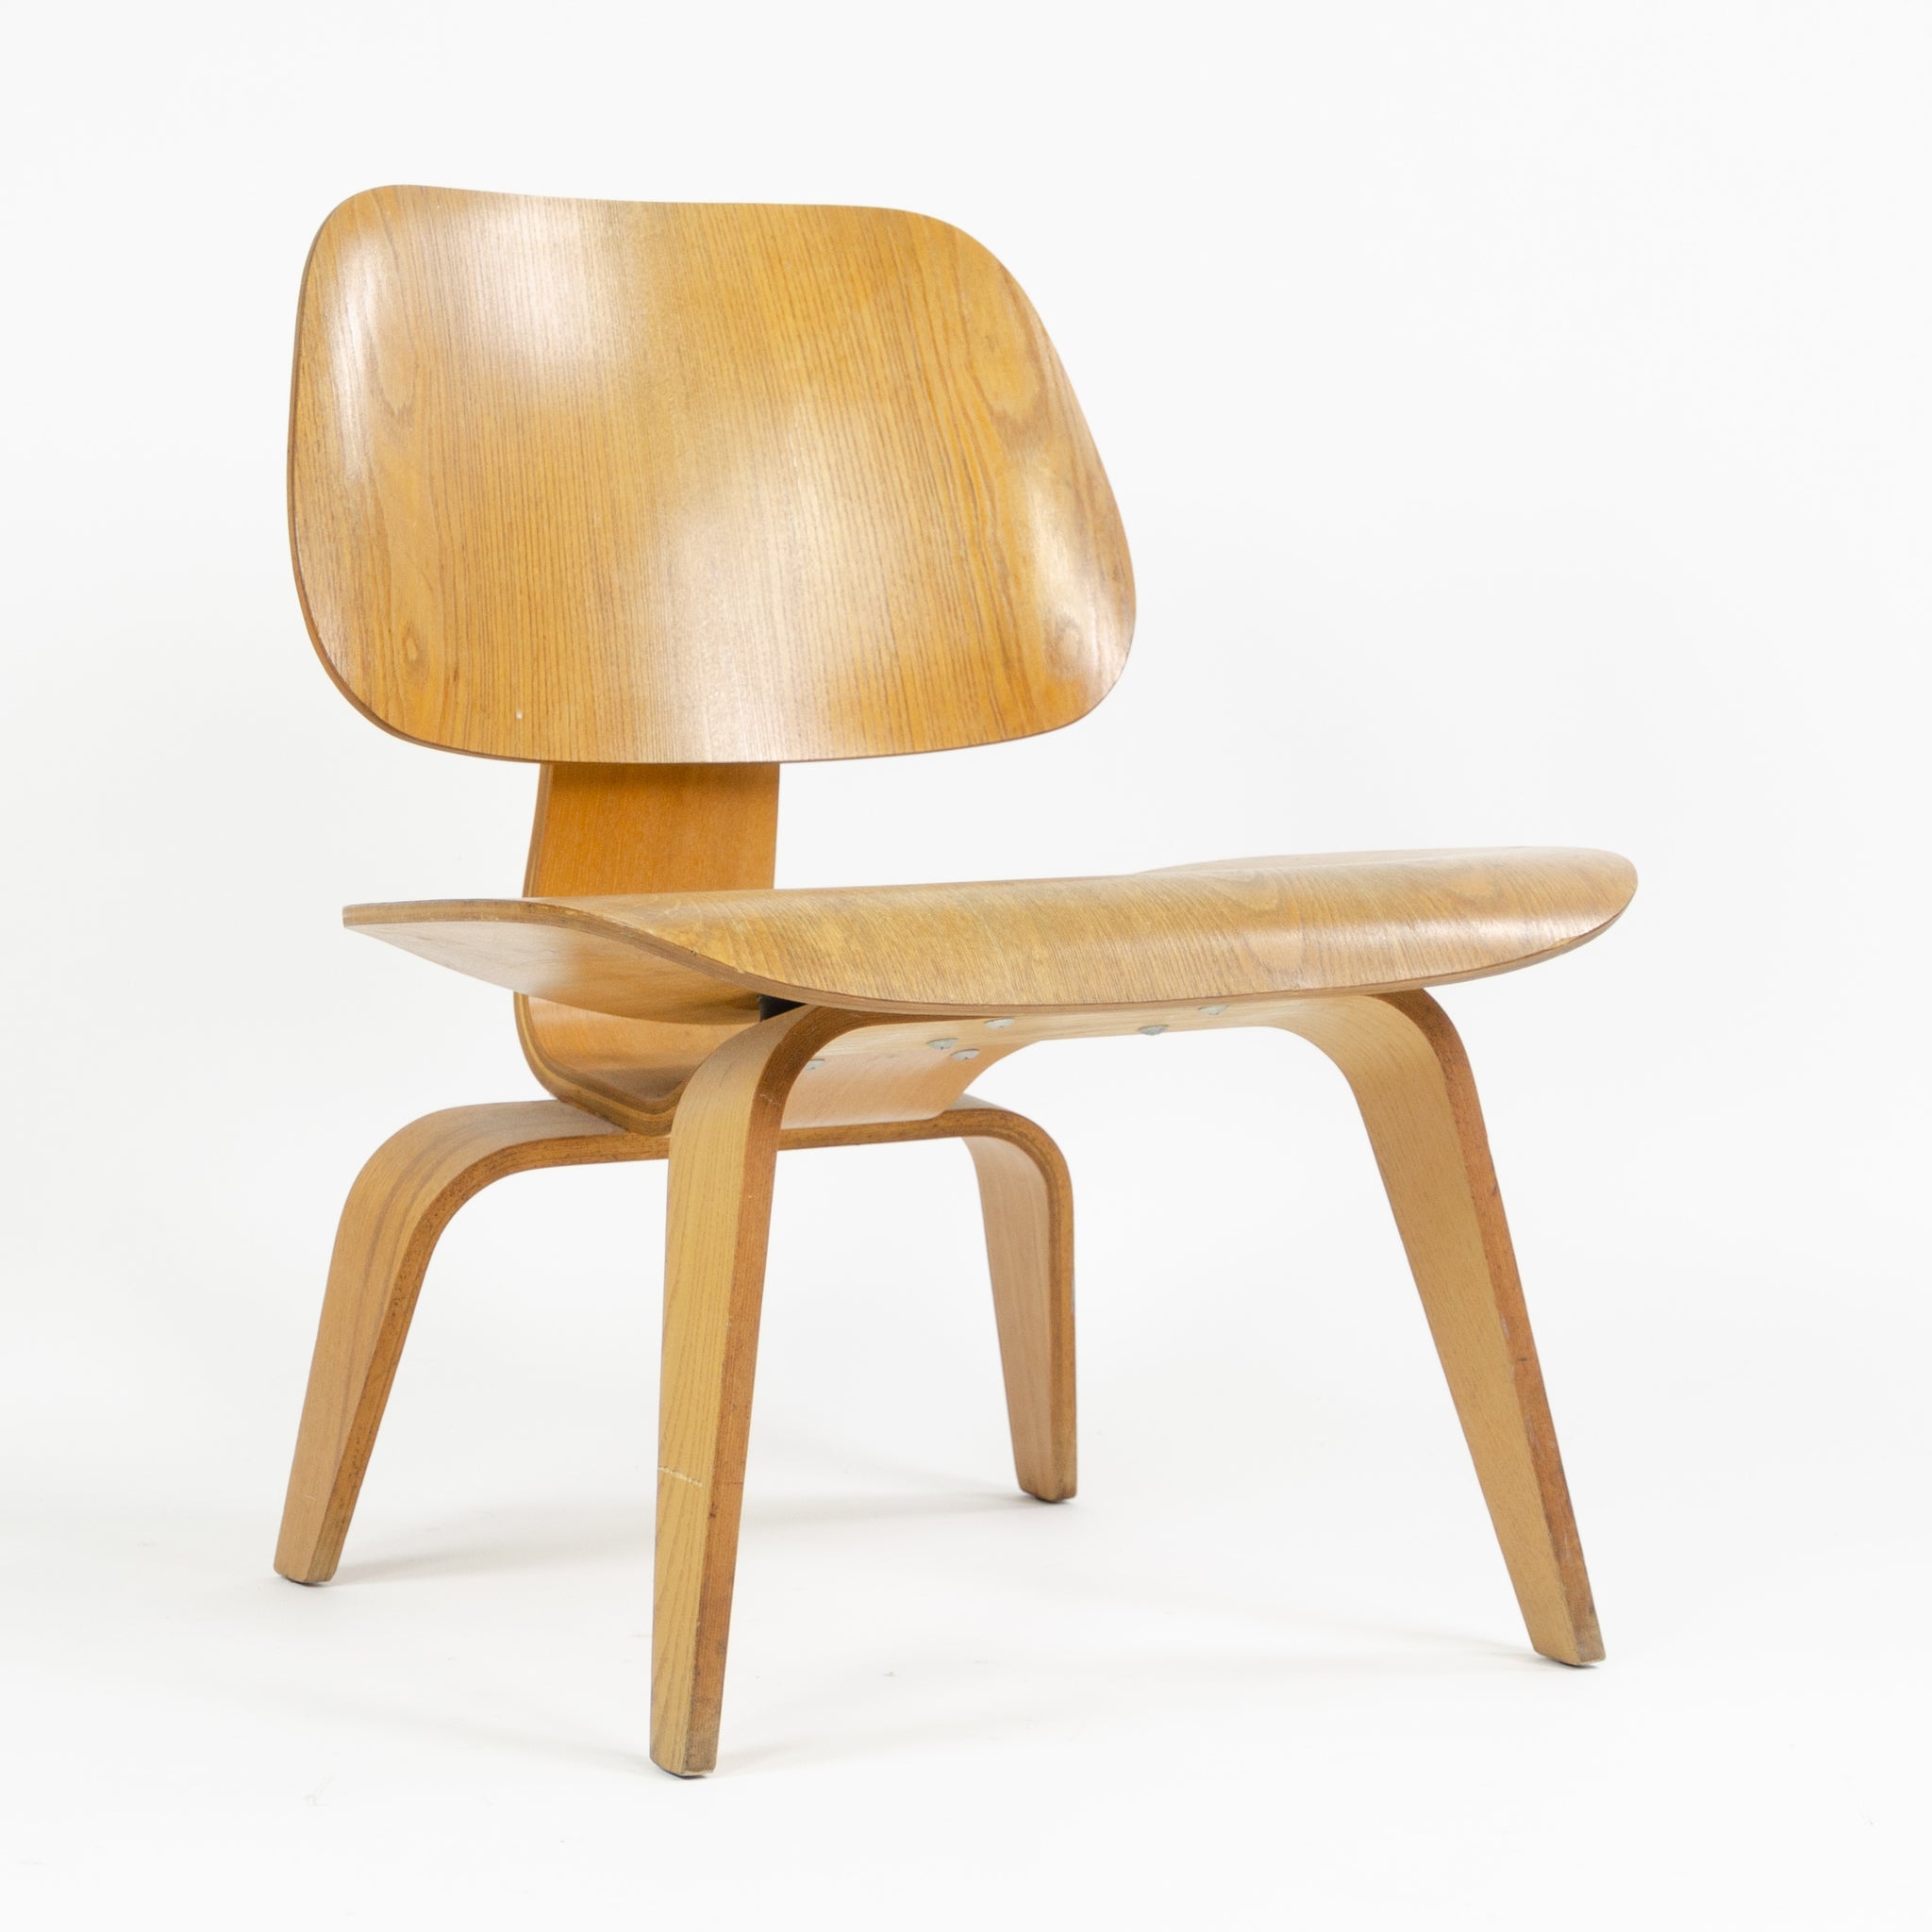 SOLD Eames Herman Miller 1953 LCW Lounge Chair Wood Evans Calico Ash